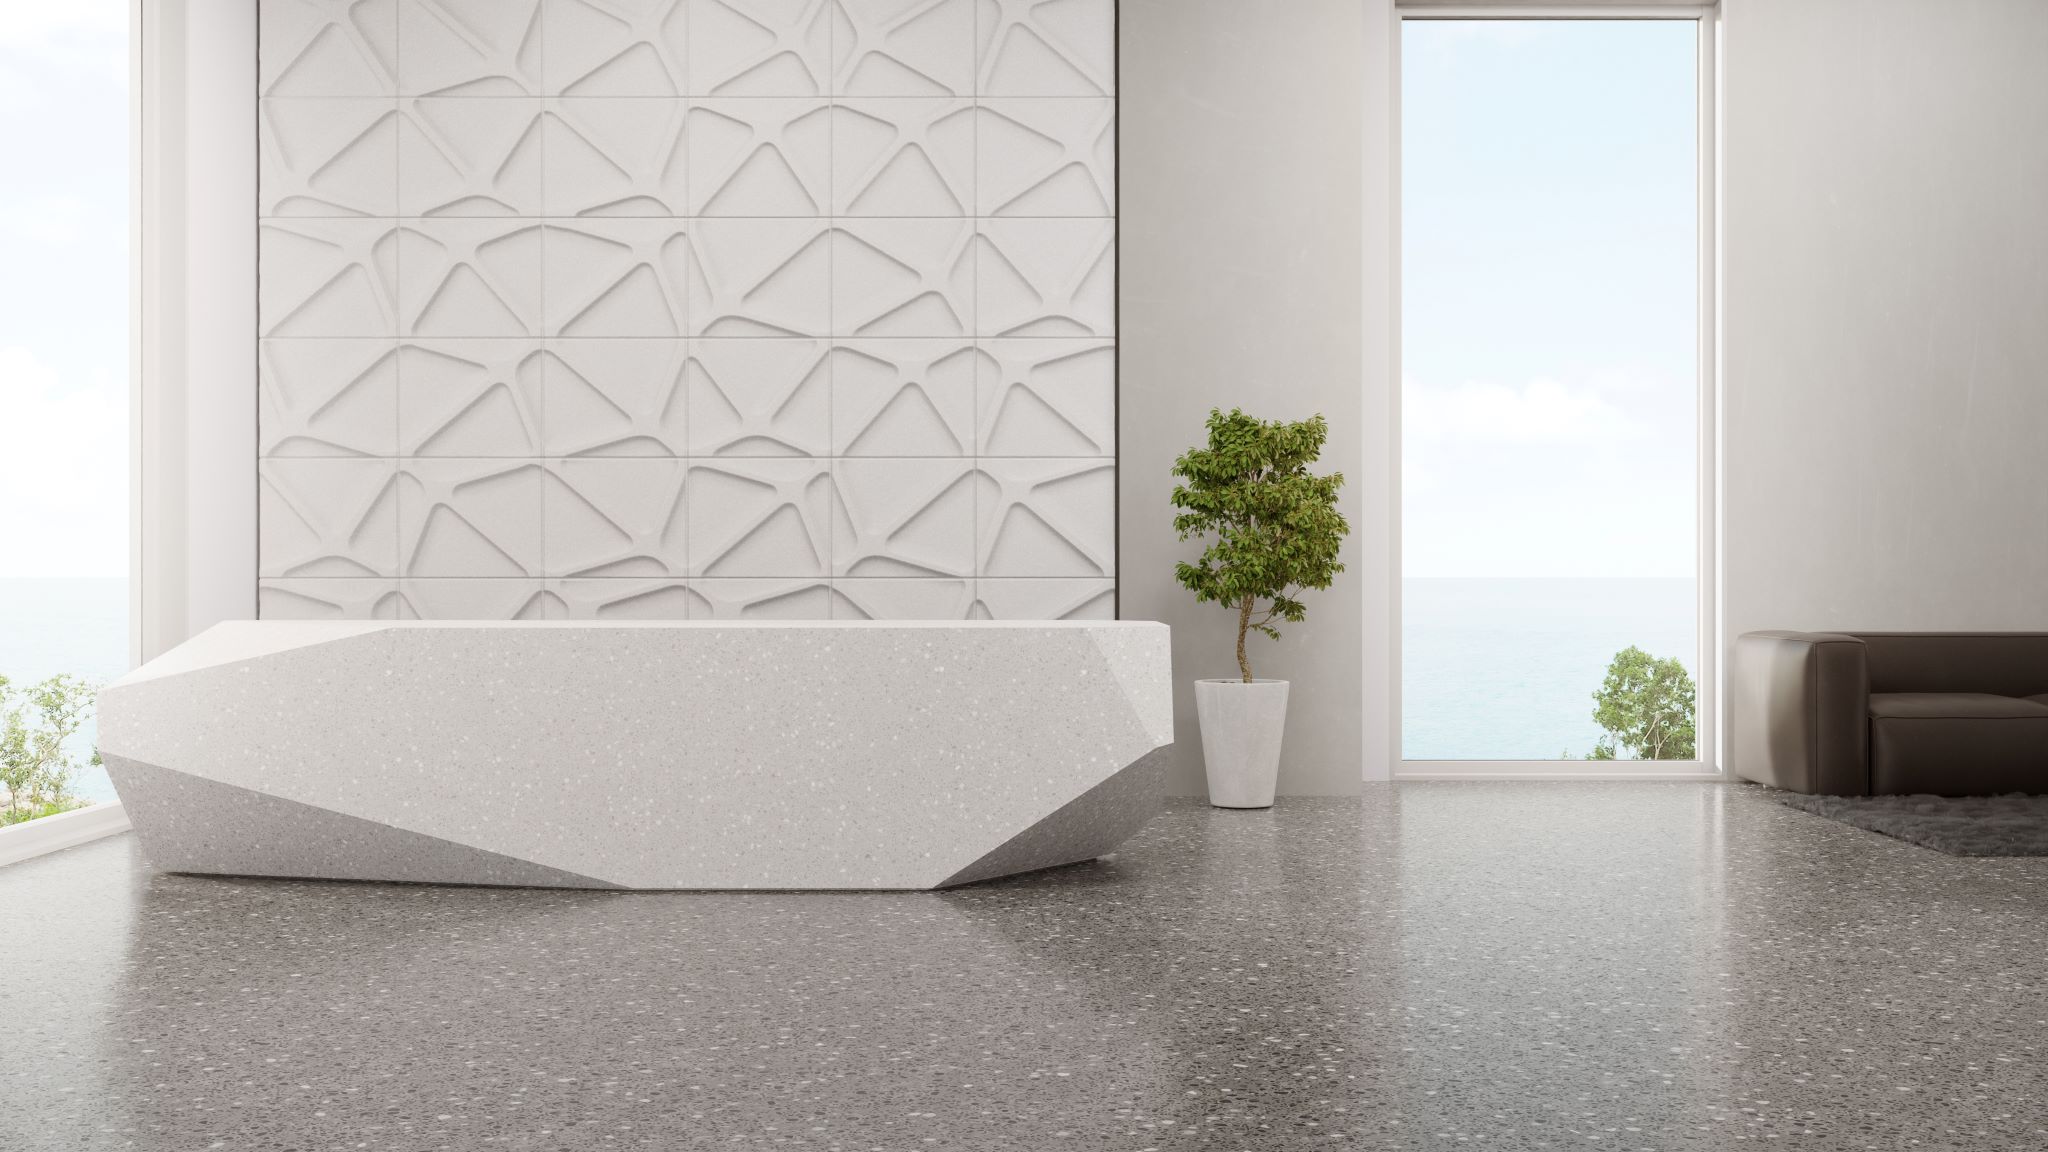 luxury interior design with terrazzo floor, white tile background, polygonal shaped counter, next to window with a sea view